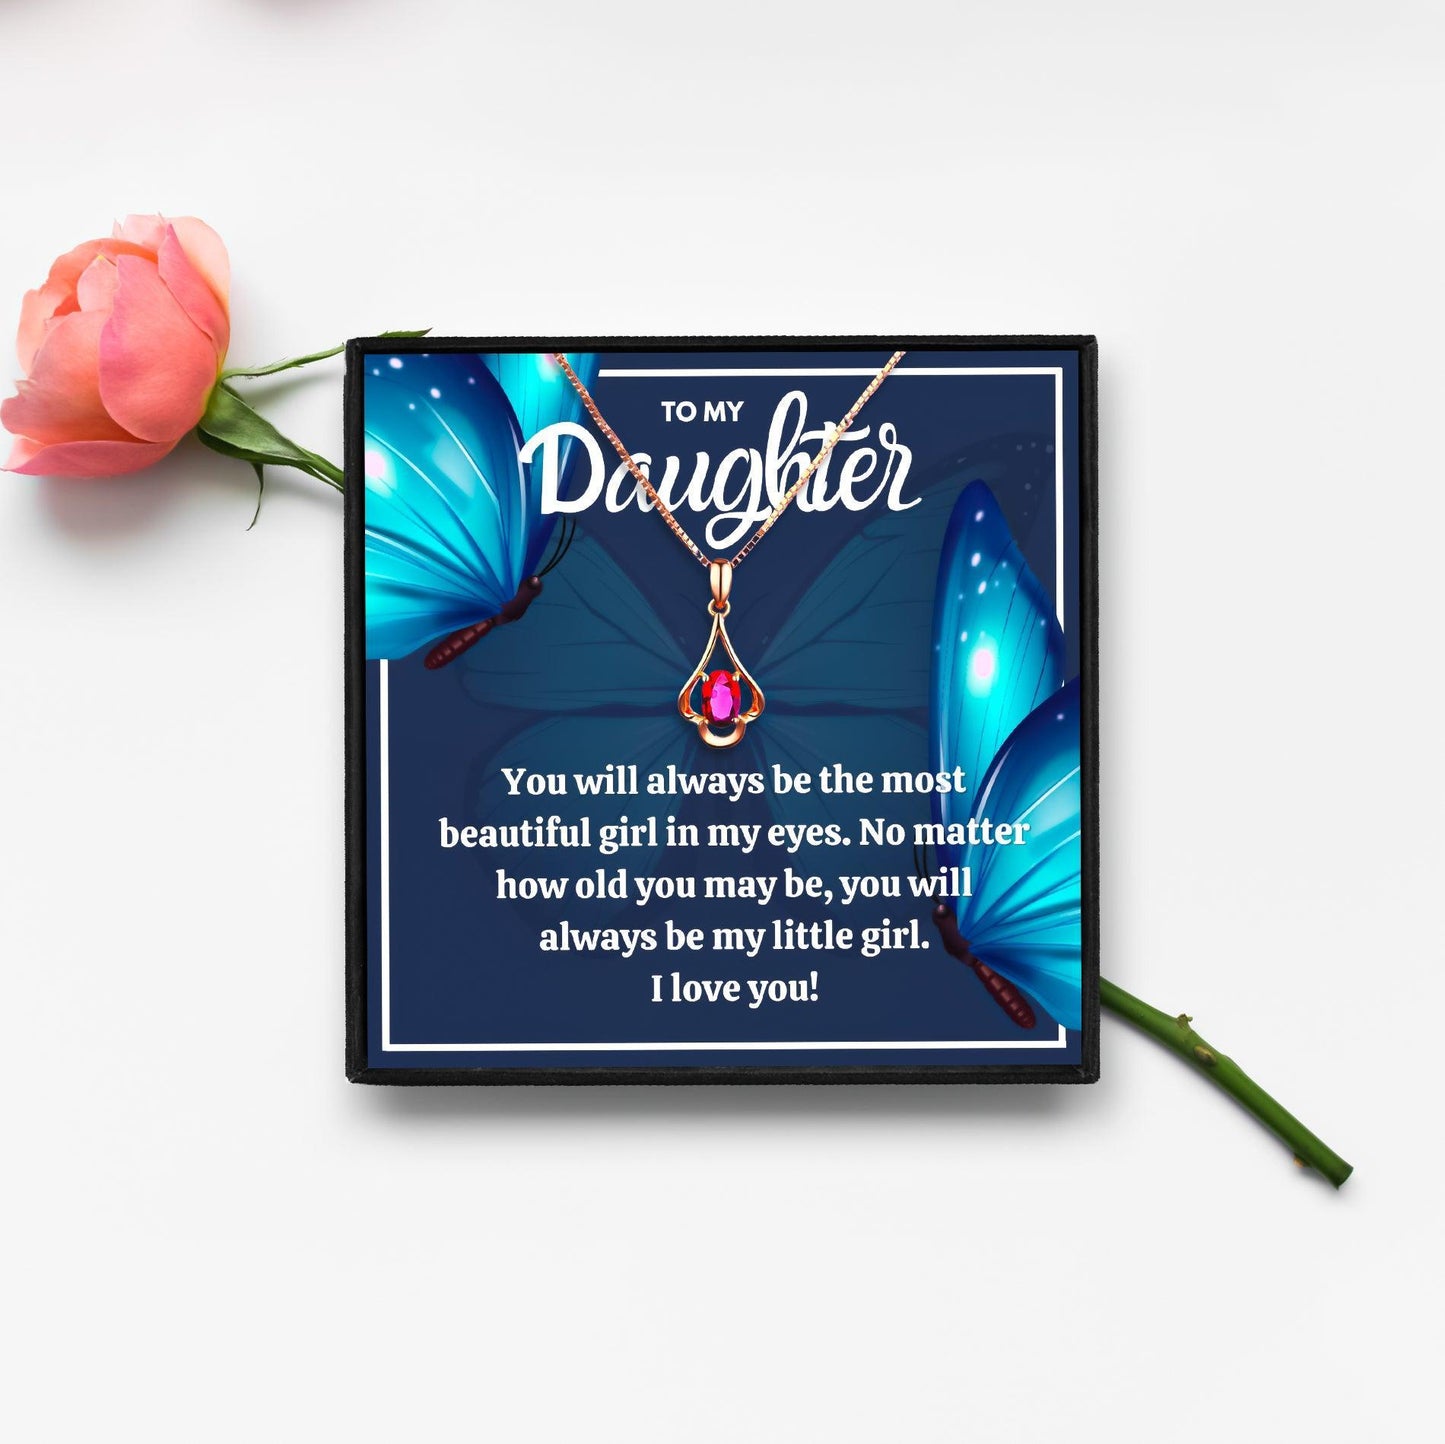 Rose Gold Necklace To My Daughter From Mom and Dad for Christmas 2023 | Rose Gold Necklace To My Daughter From Mom and Dad - undefined | Mother Daughter, Mother Daughter Gift Necklace, Mother Daughter Infinity Necklace, Mother Daughter Interlocking Circle Necklace Gift Set, Mother Daughter Necklace, Mother Daughter Wedding Gift | From Hunny Life | hunnylife.com